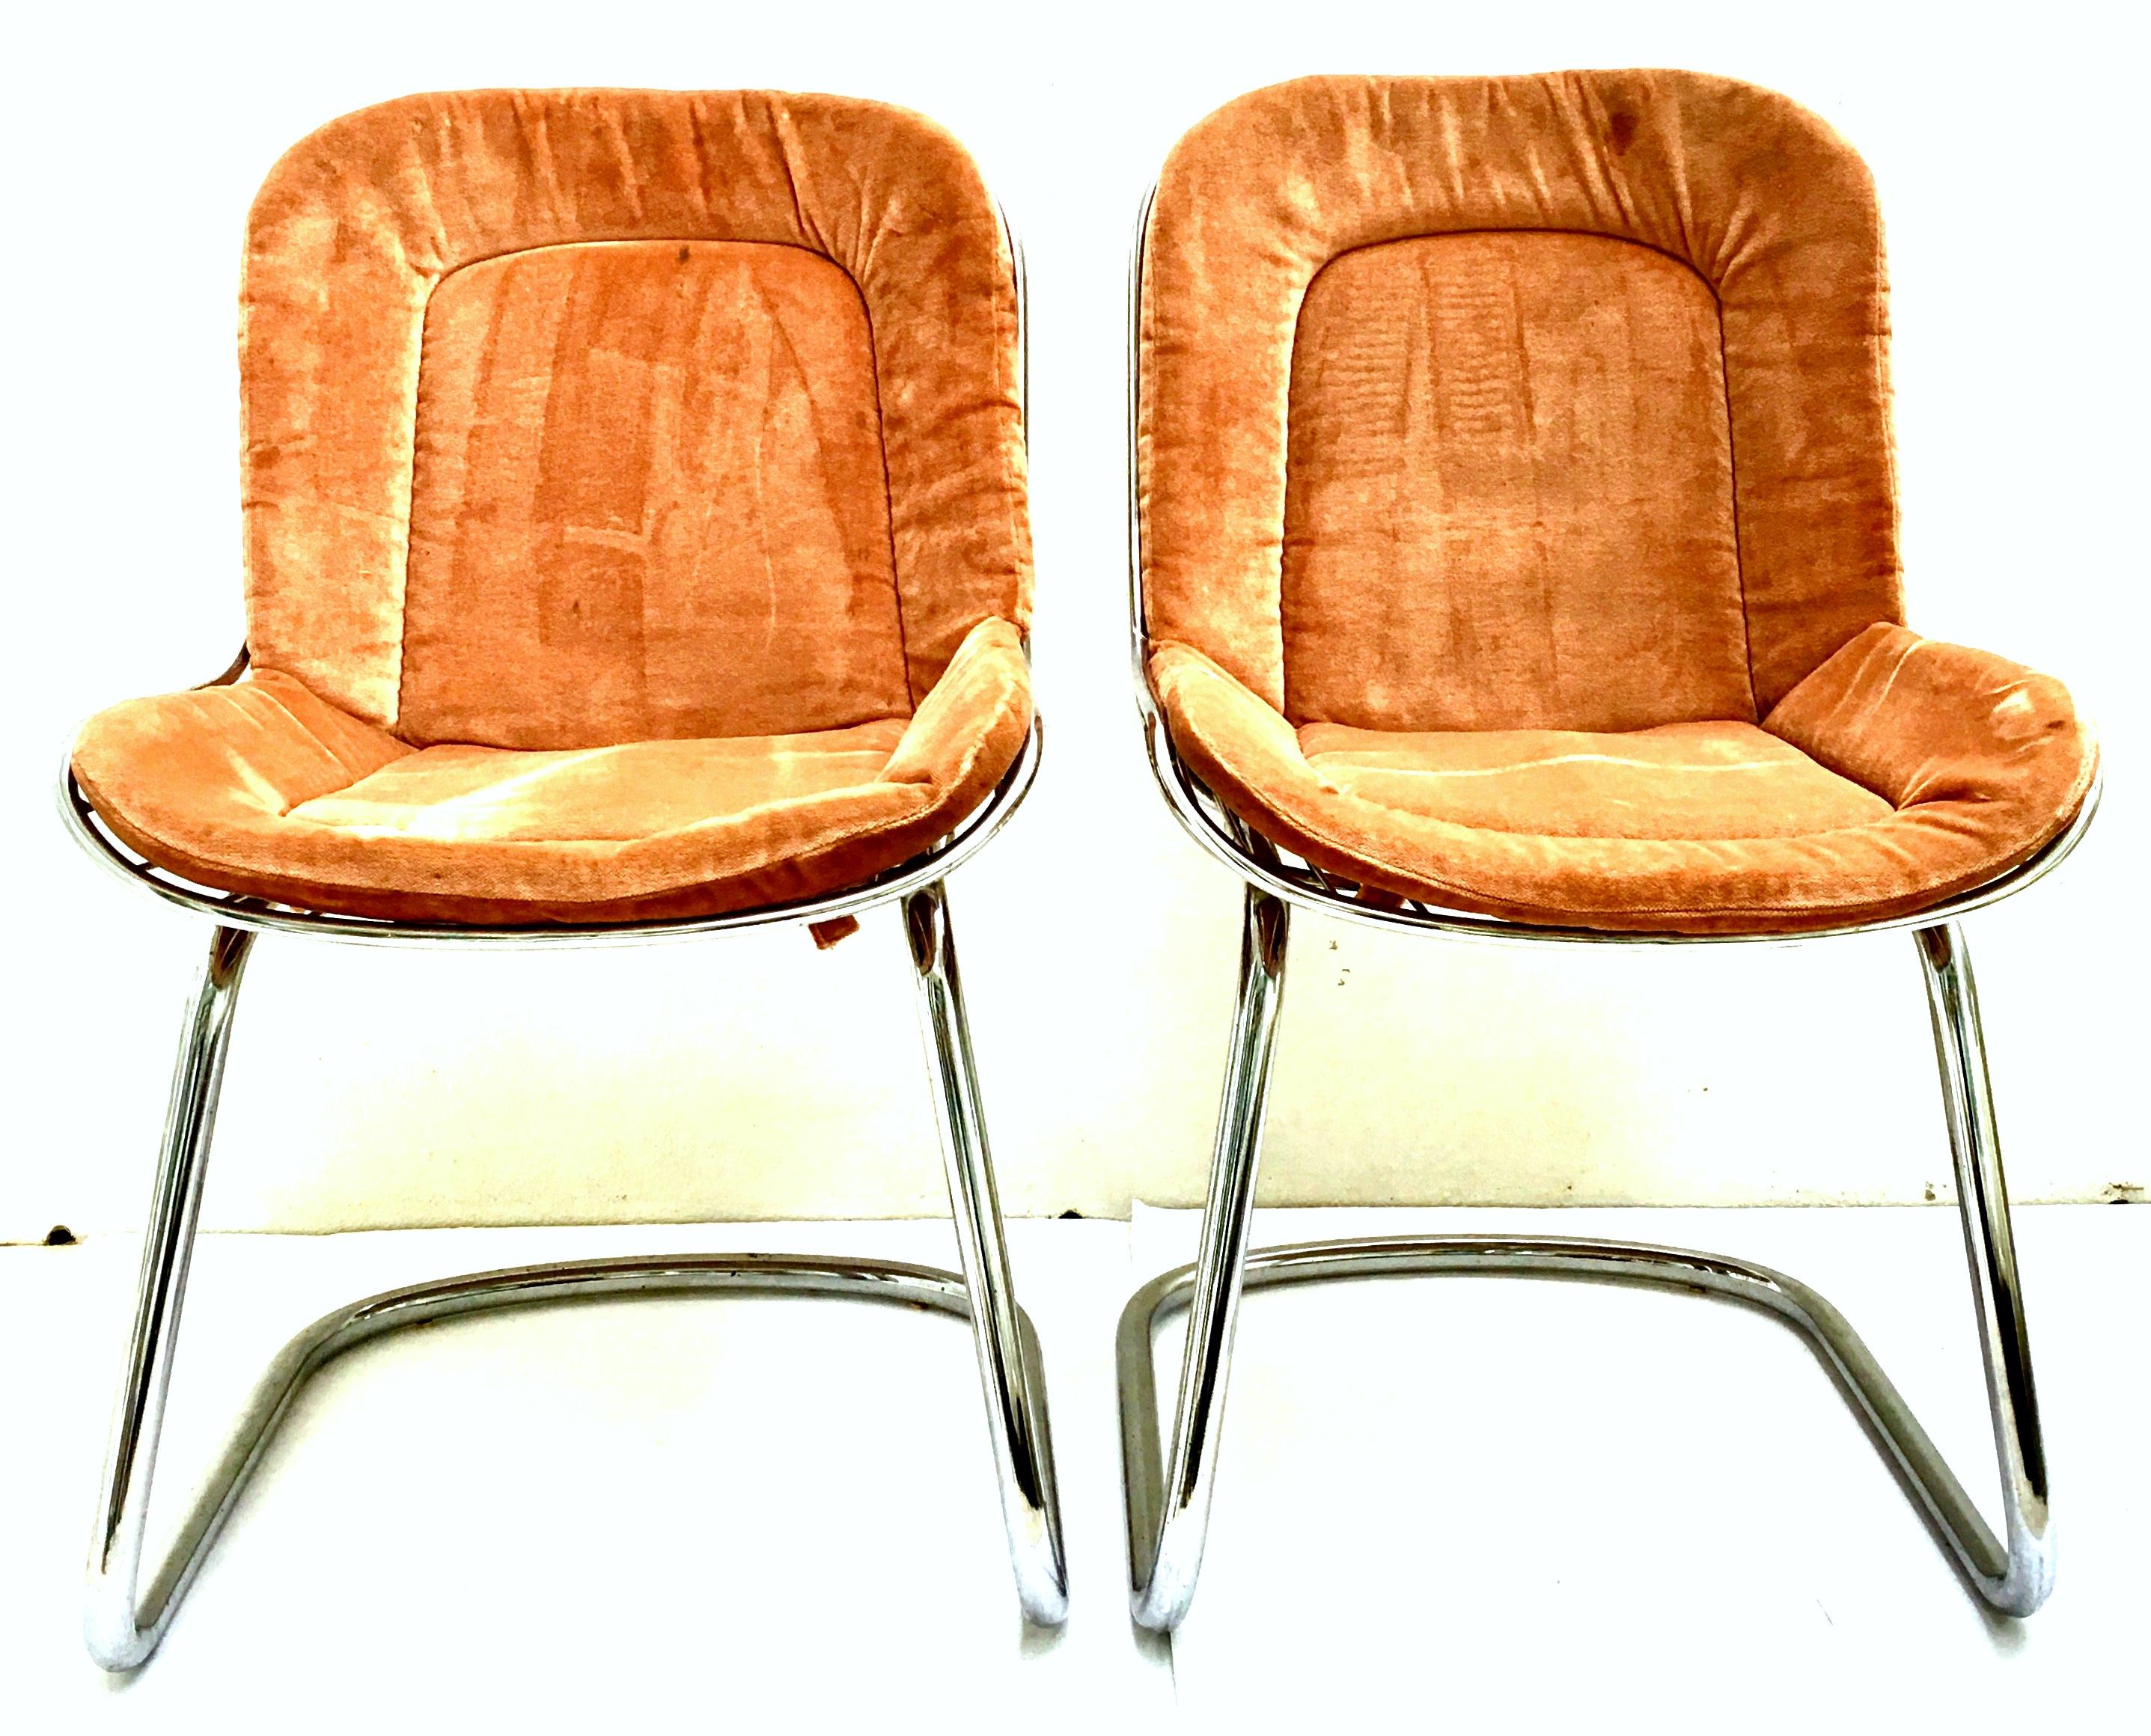 1960'S Pair Of  Italian Gastone Rinaldi style chrome tubular wire slipper side chairs. Original Pair of orange velvet removable one piece cushions inserts included.